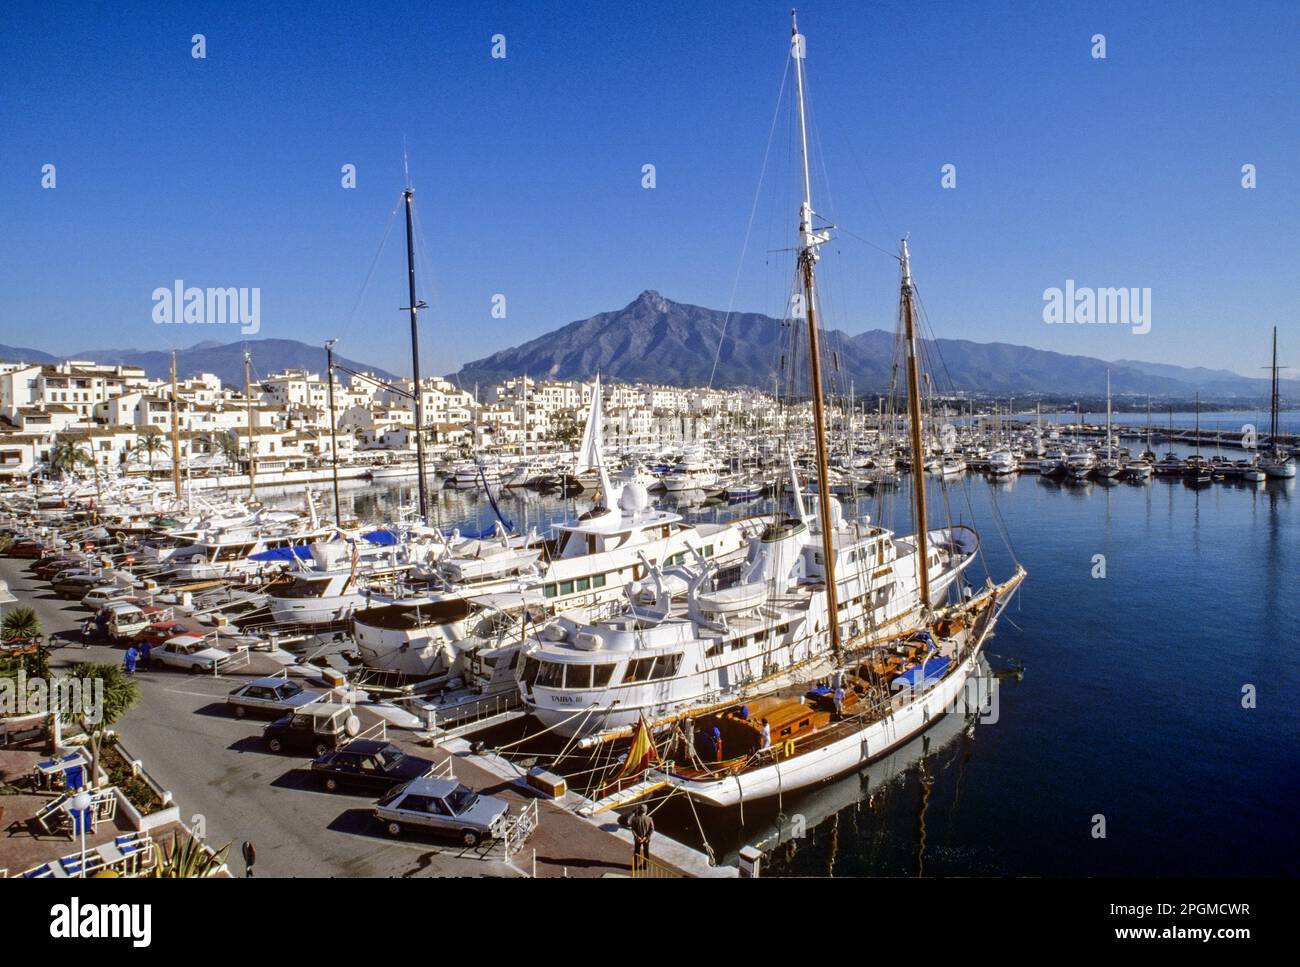 PUERTO BANUS Vintage 1980s historic retro overview of harbour at Puerto Banus Marbella with luxury yachts in foreground Costa del Sol Southern Spain Marbella Vintage Retro 1980s Puerto Bank us Marbella Spain with rare landscape view over the styles fashions and luxury sailing motor yachts moored in Puerto Banus Marina Port of the 80s era. Marbella Andalucia Spain Stock Photo